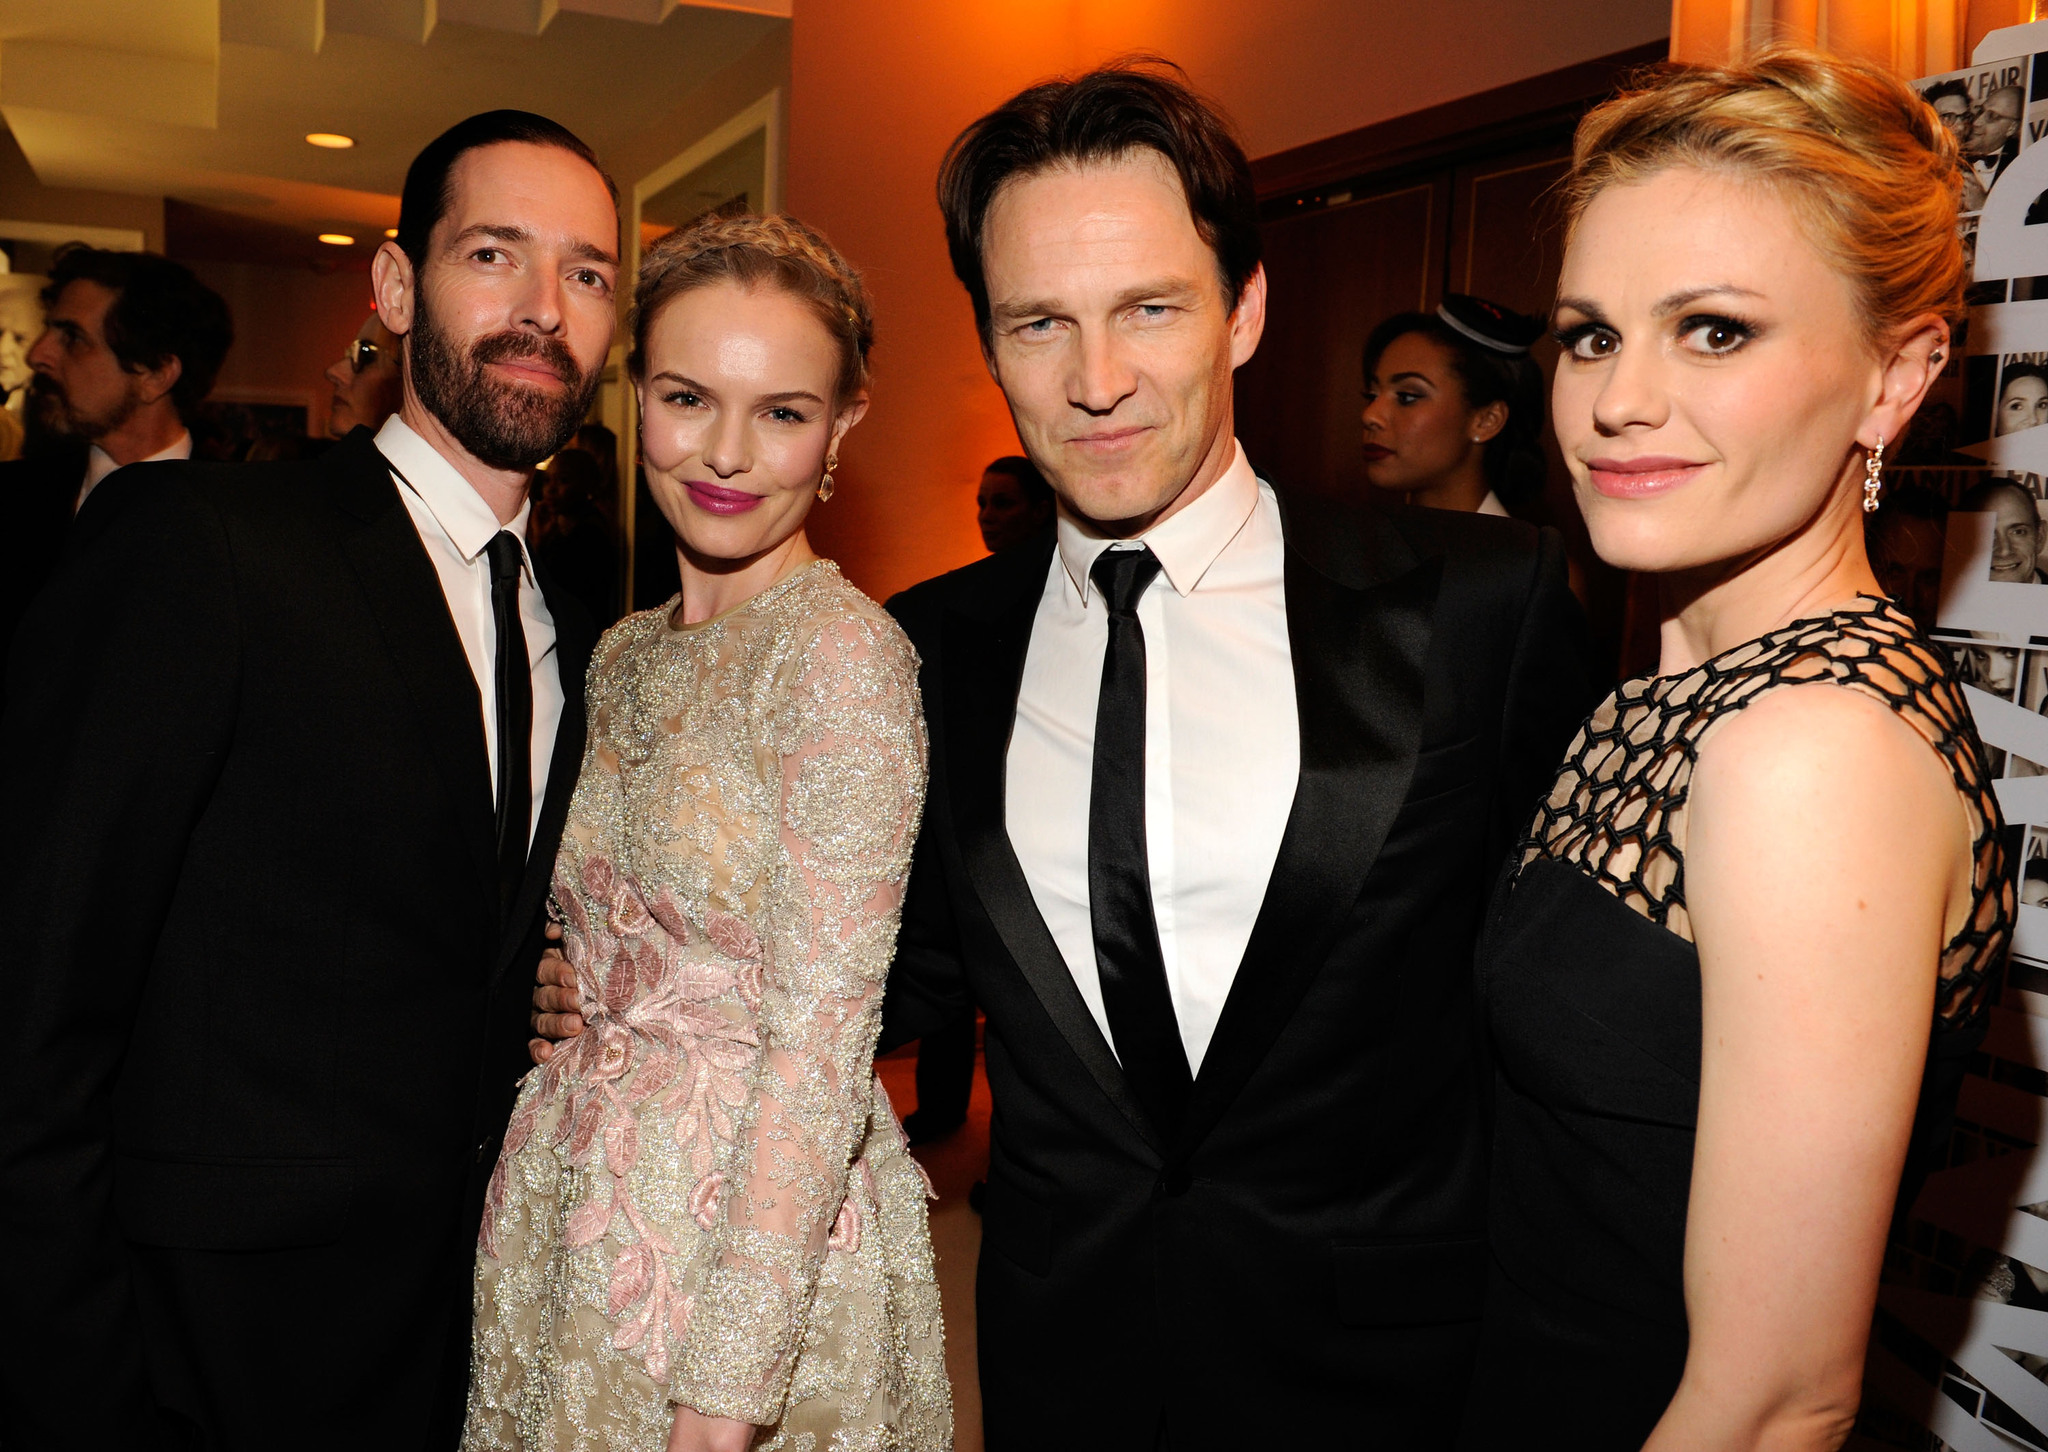 Anna Paquin, Kate Bosworth, Stephen Moyer and Mark Polish